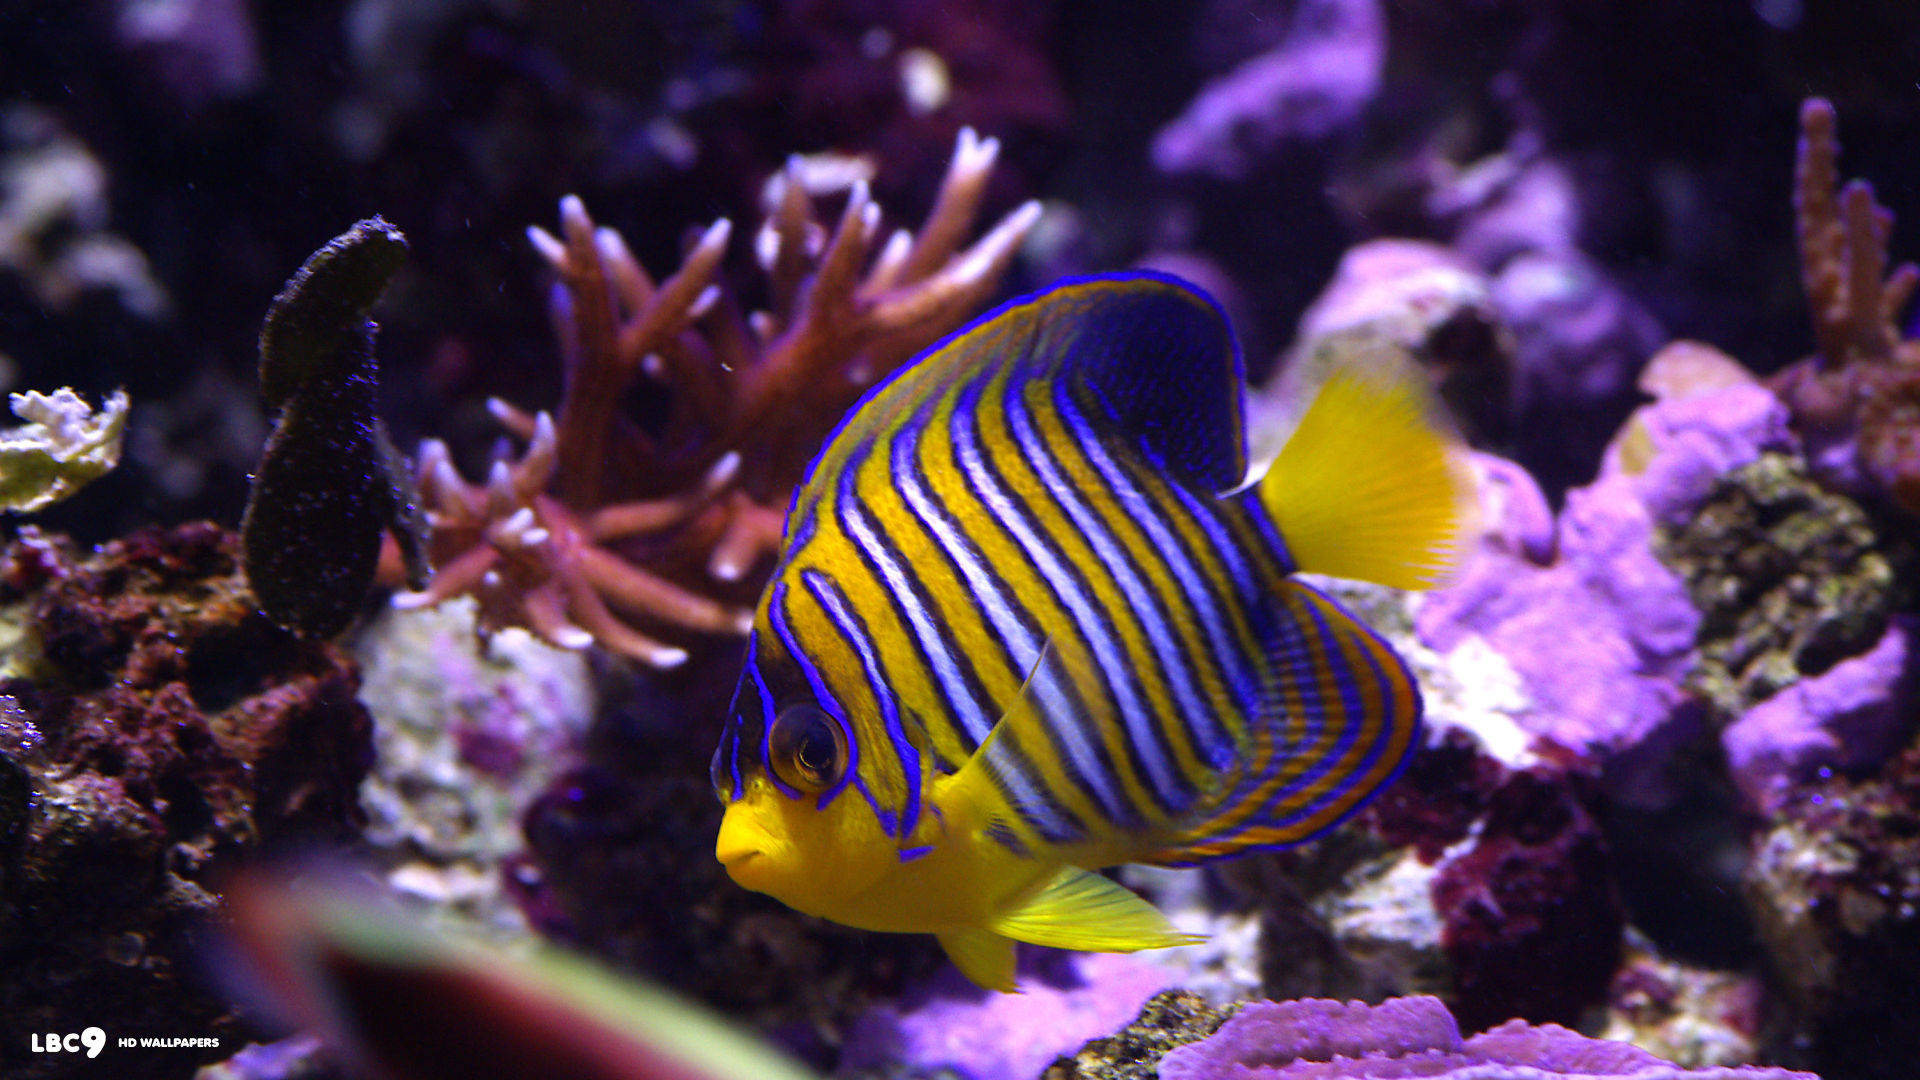 A Close-up Look At A Small Yellow And Blue Fish Background